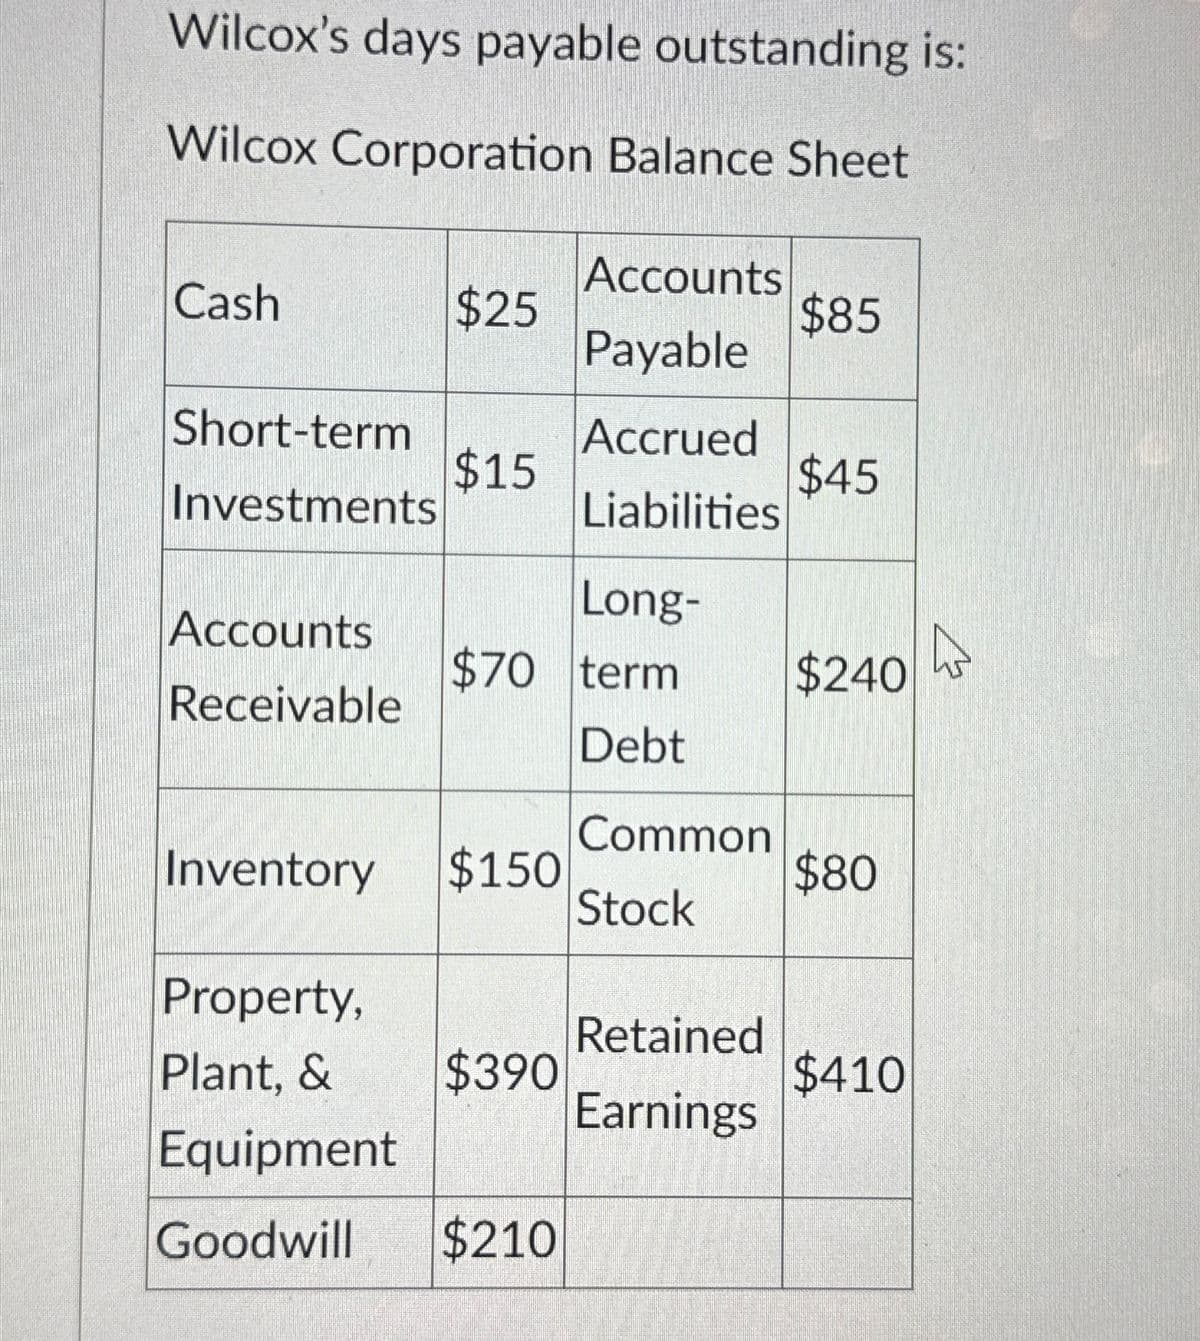 Wilcox's days payable outstanding is:
Wilcox Corporation Balance Sheet
Accounts
Cash
$25
$85
Payable
Short-term
Accrued
$15
$45
Investments
Liabilities
Long-
Accounts
$70 term
$240
Receivable
Debt
Common
Inventory
$150
$80
Stock
Property,
Retained
Plant, & $390
$410
Earnings
Equipment
Goodwill $210